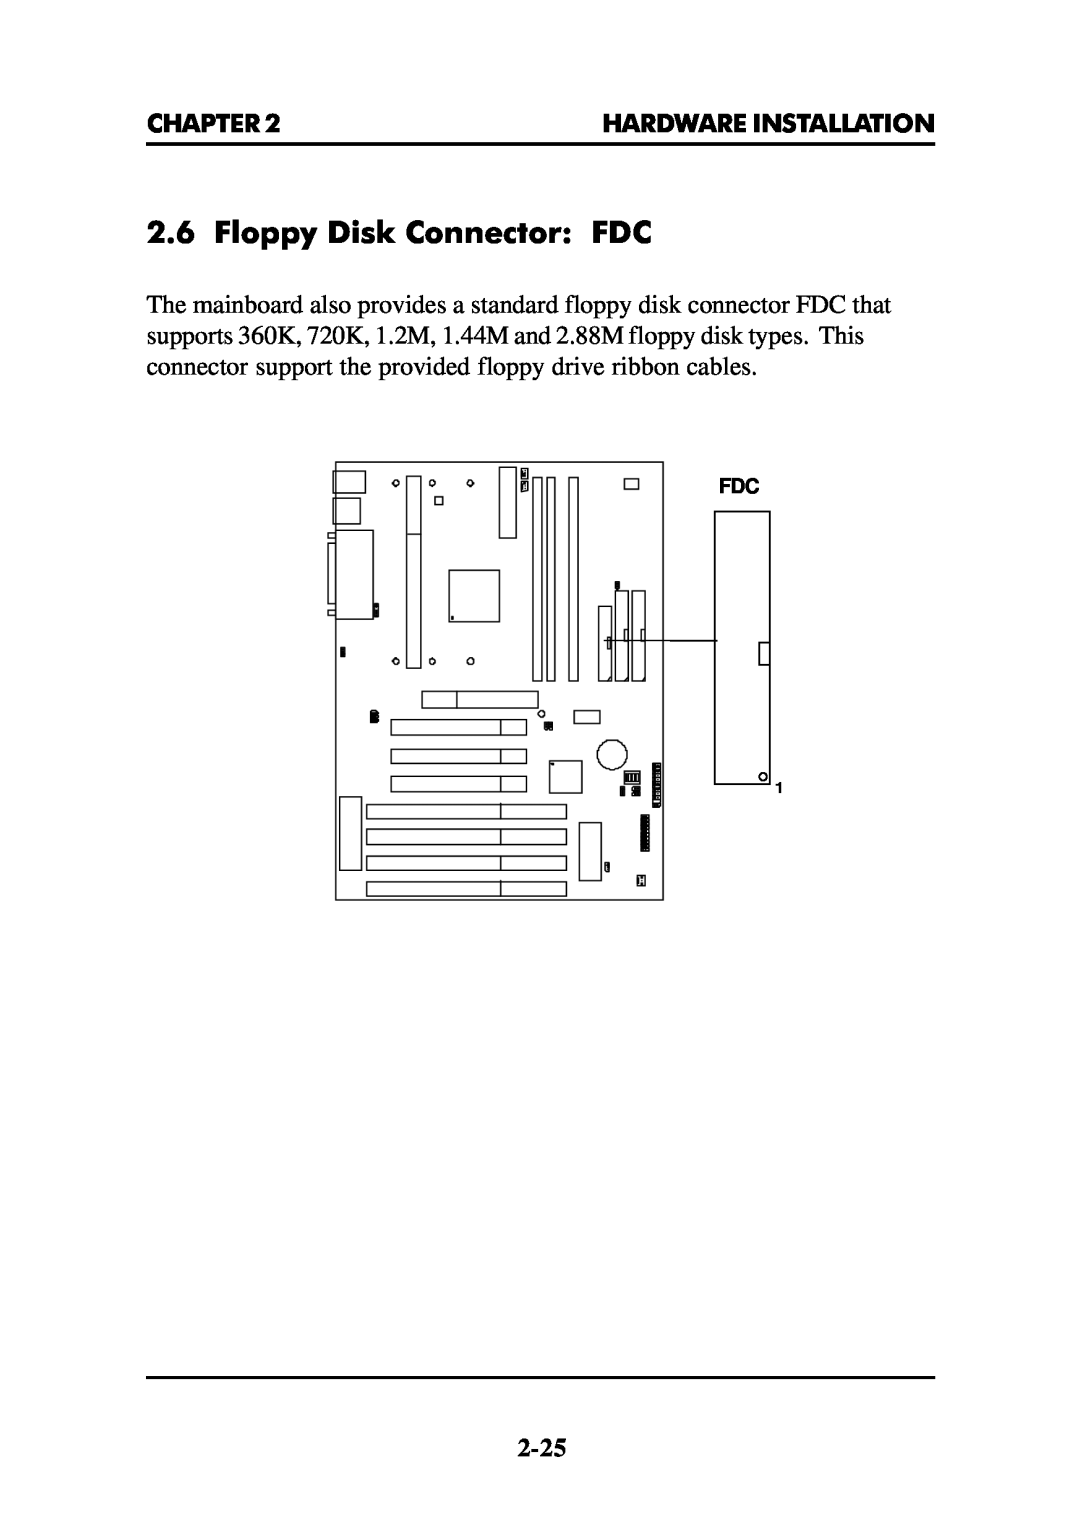 Intel MS-6112 manual Floppy Disk Connector FDC, Chapter, Hardware Installation 